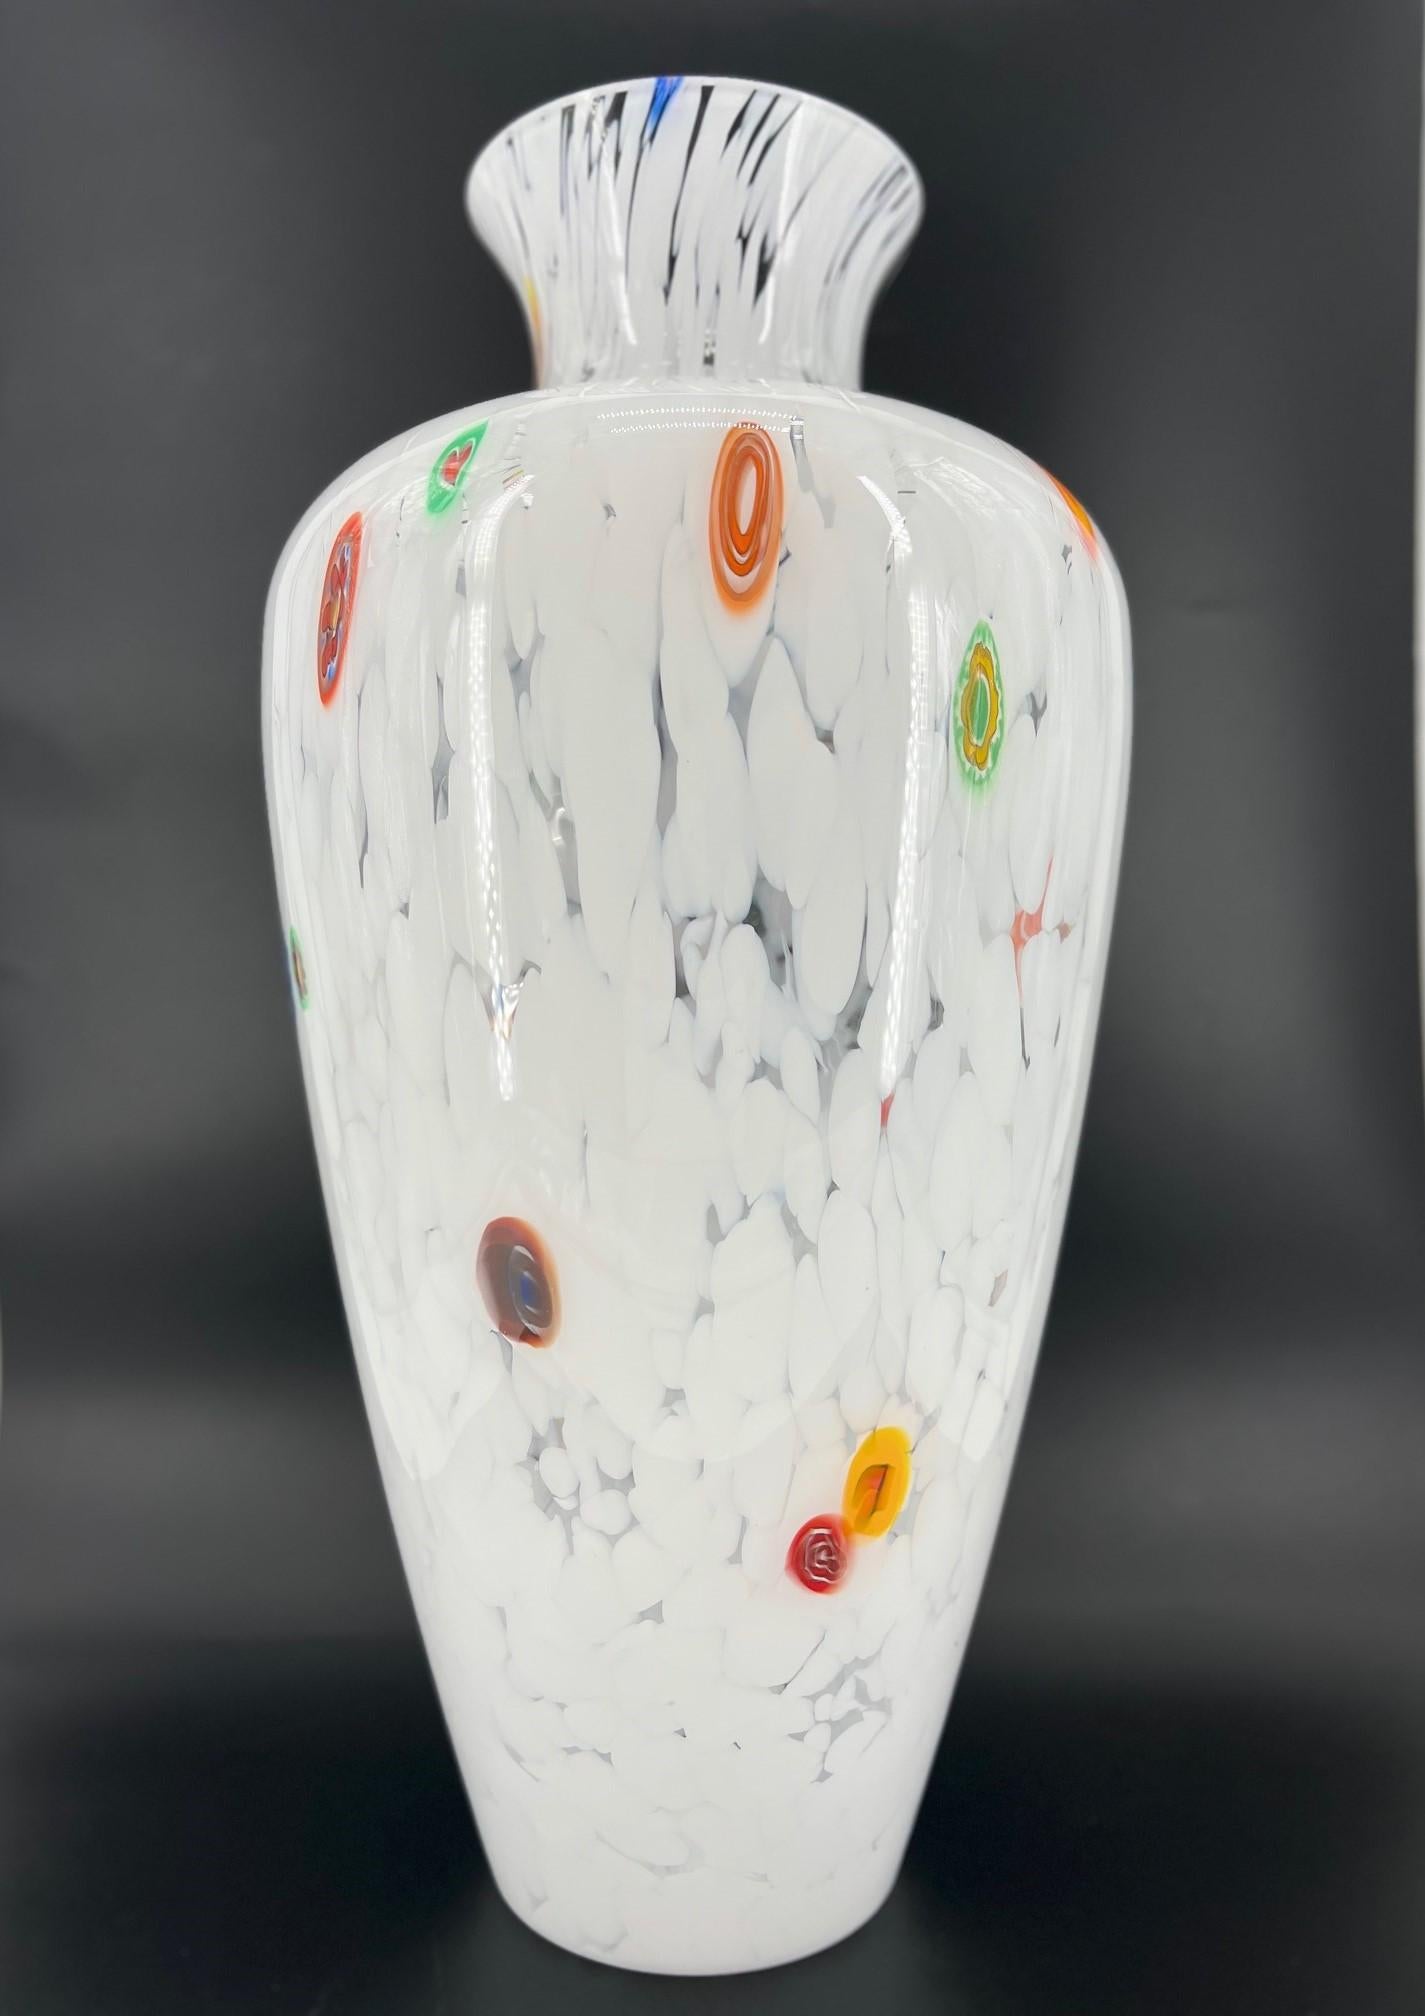 Our primary goal is to evoke emotions through the creation of unique and exquisite Murano glass art pieces. This particular art-vase is made from high-quality white blown glass and features an outer layer of colorful Murano Murrine. Each piece is